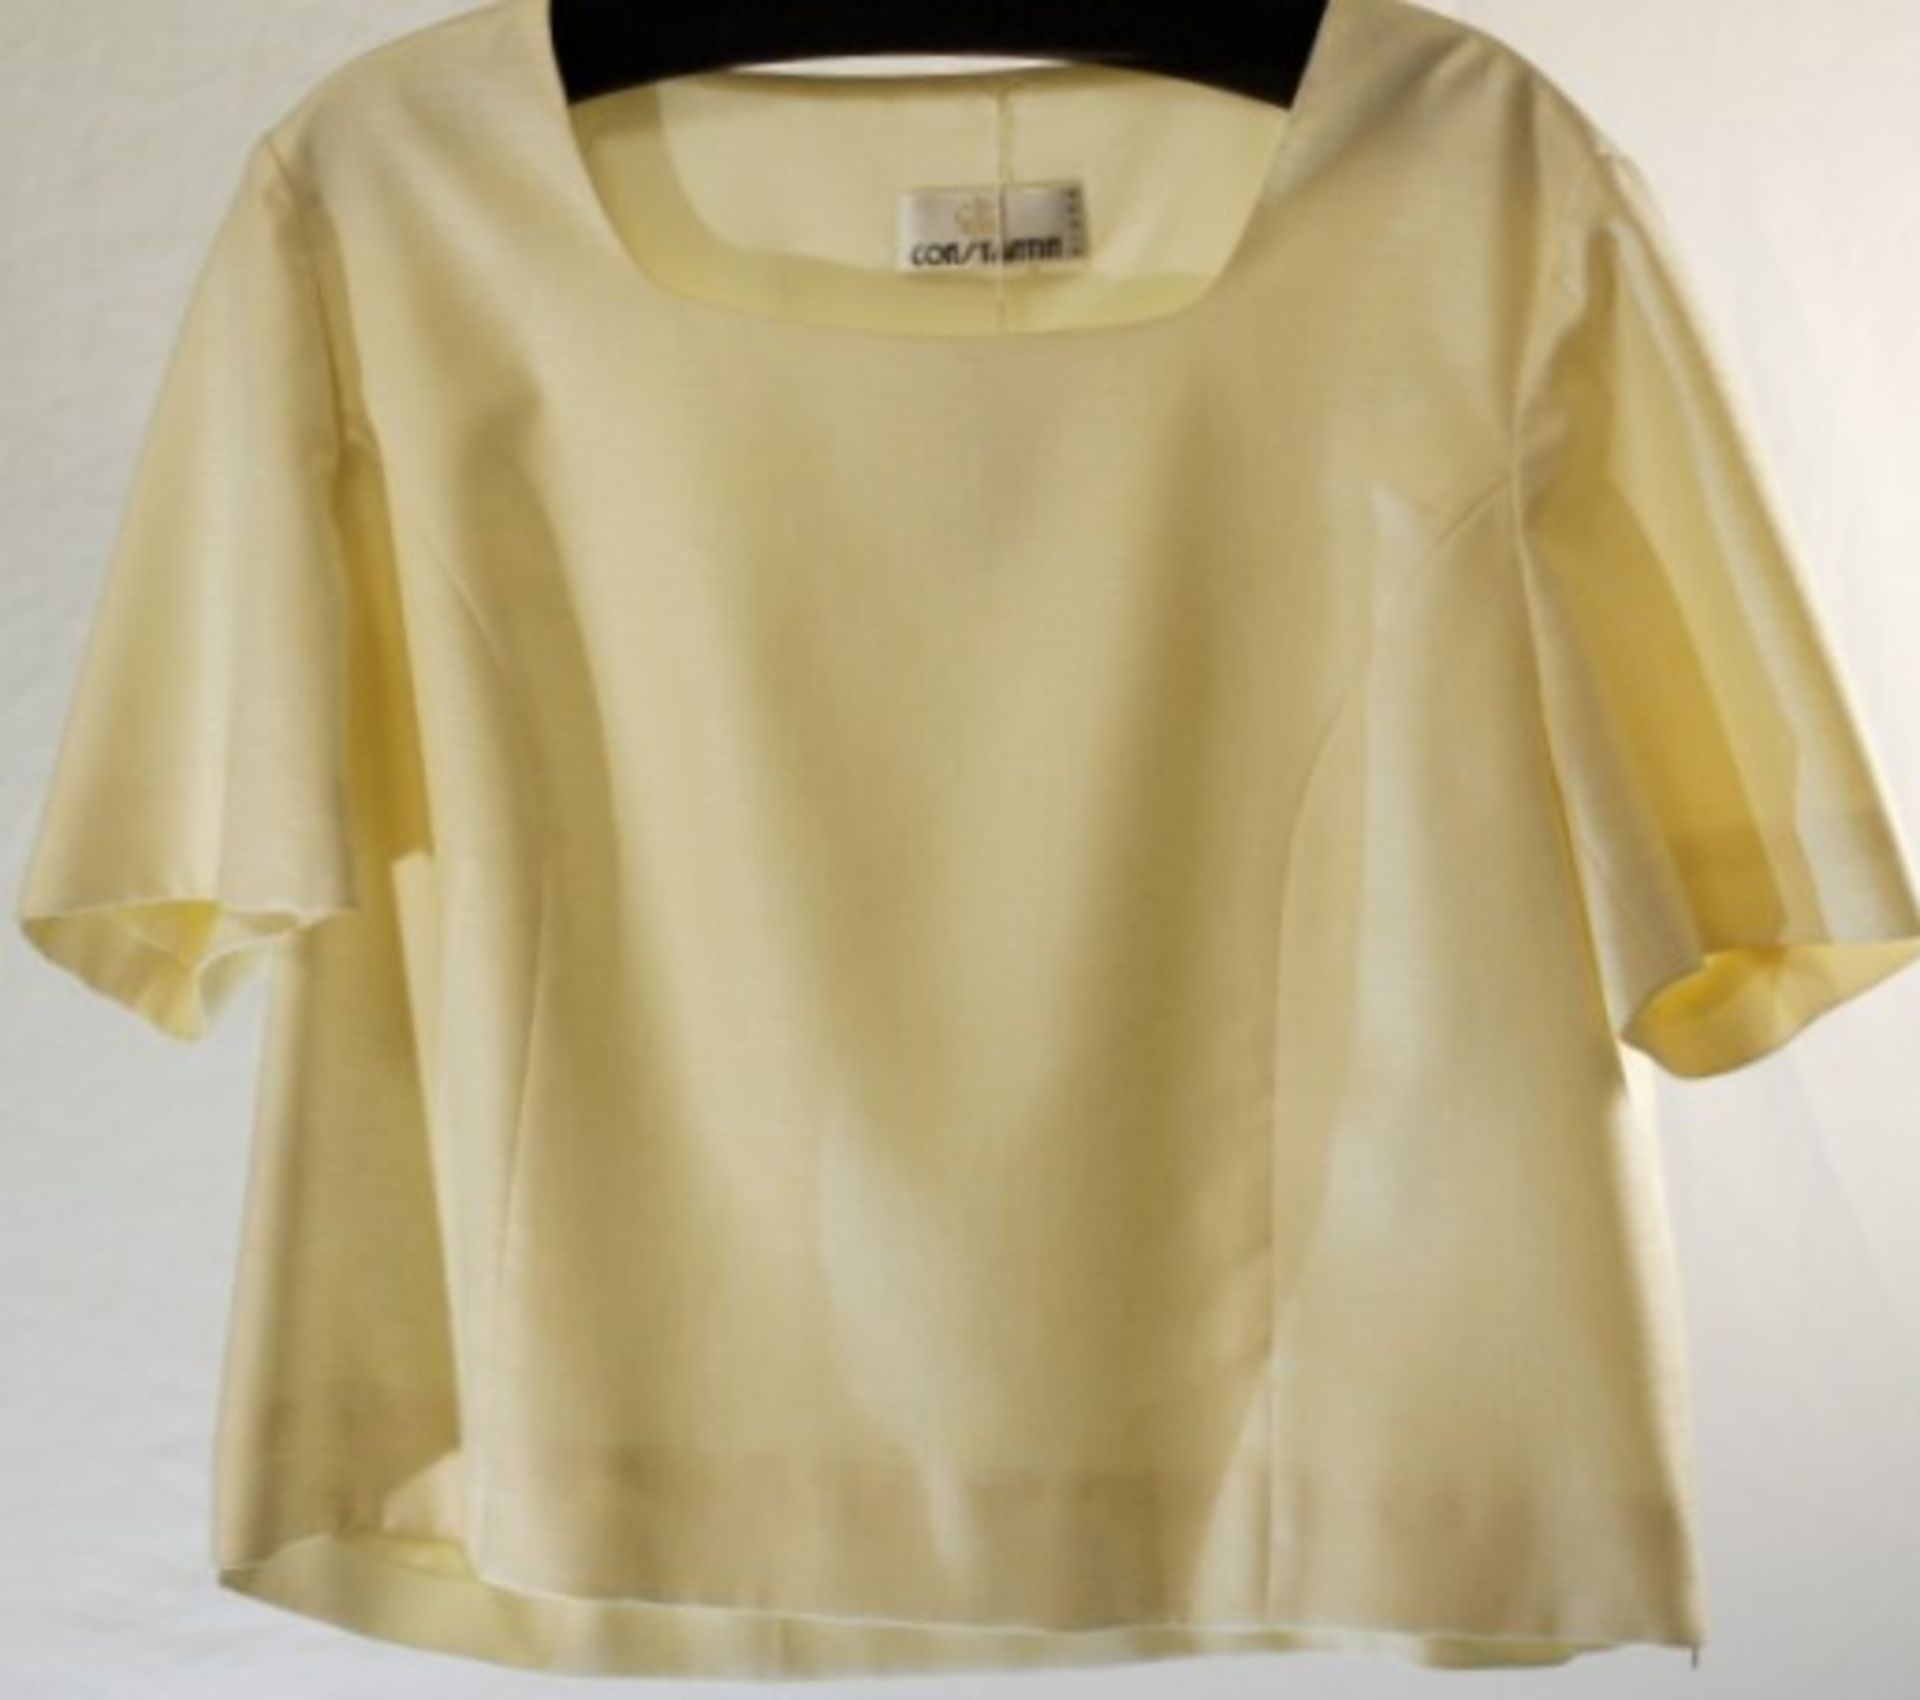 1 x Constantin Paris Cream Top - Size: 22 - Material: 100% Polyester - From a High End Clothing - Image 6 of 8